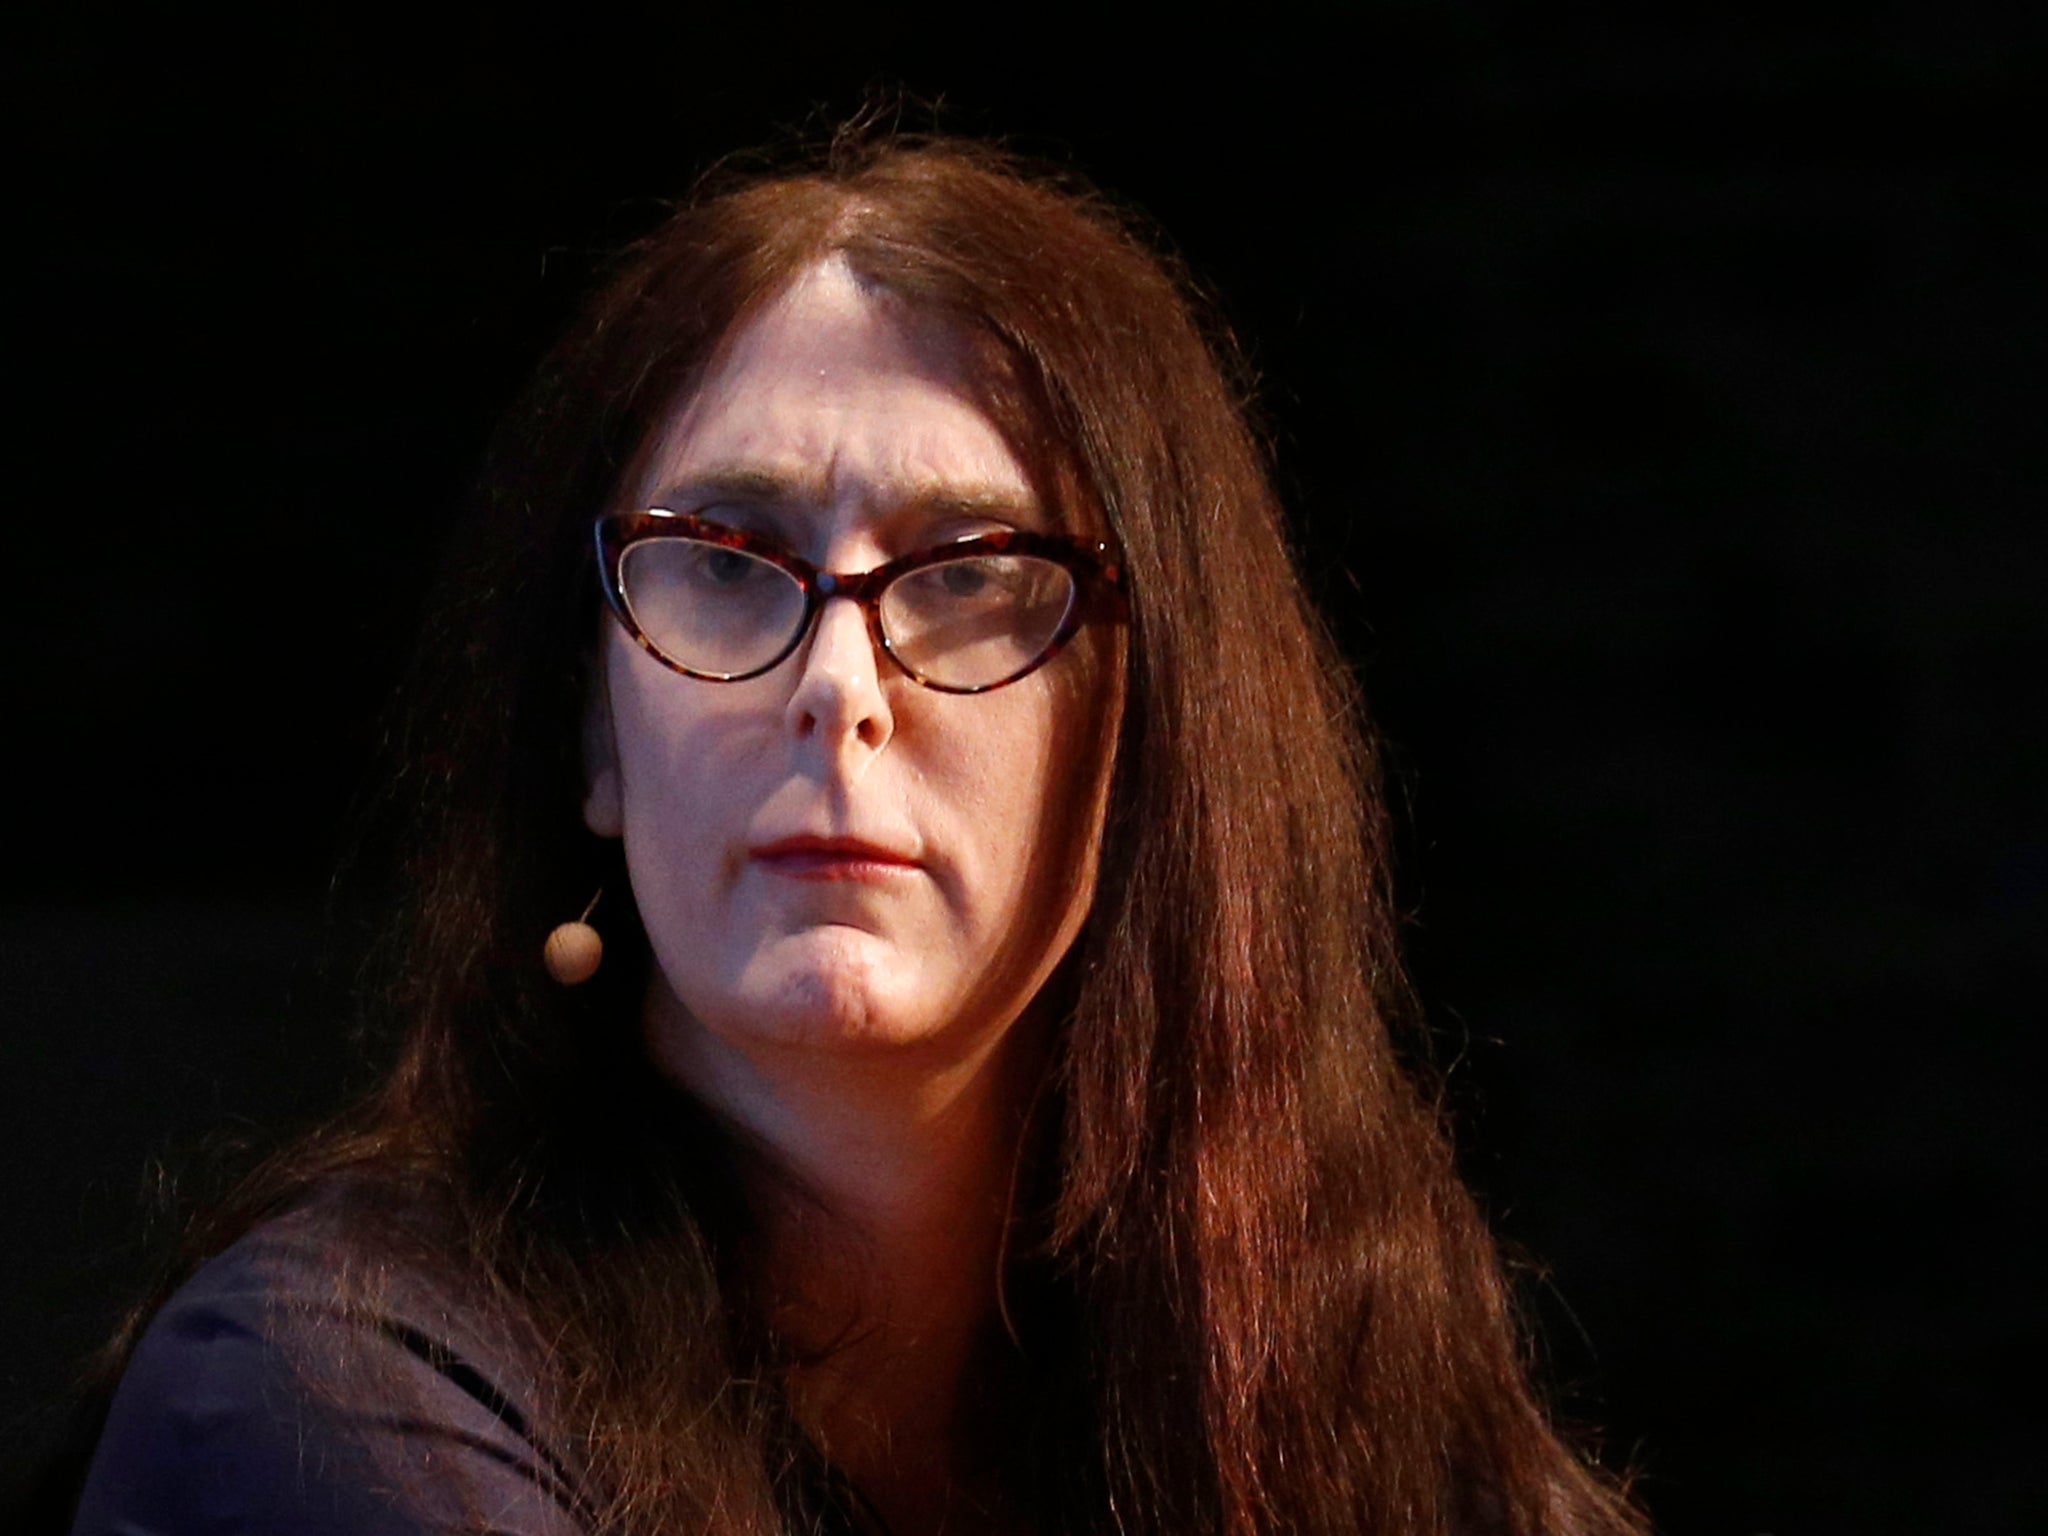 Brianna Wu received multiple death threats for daring to express a view (Getty)